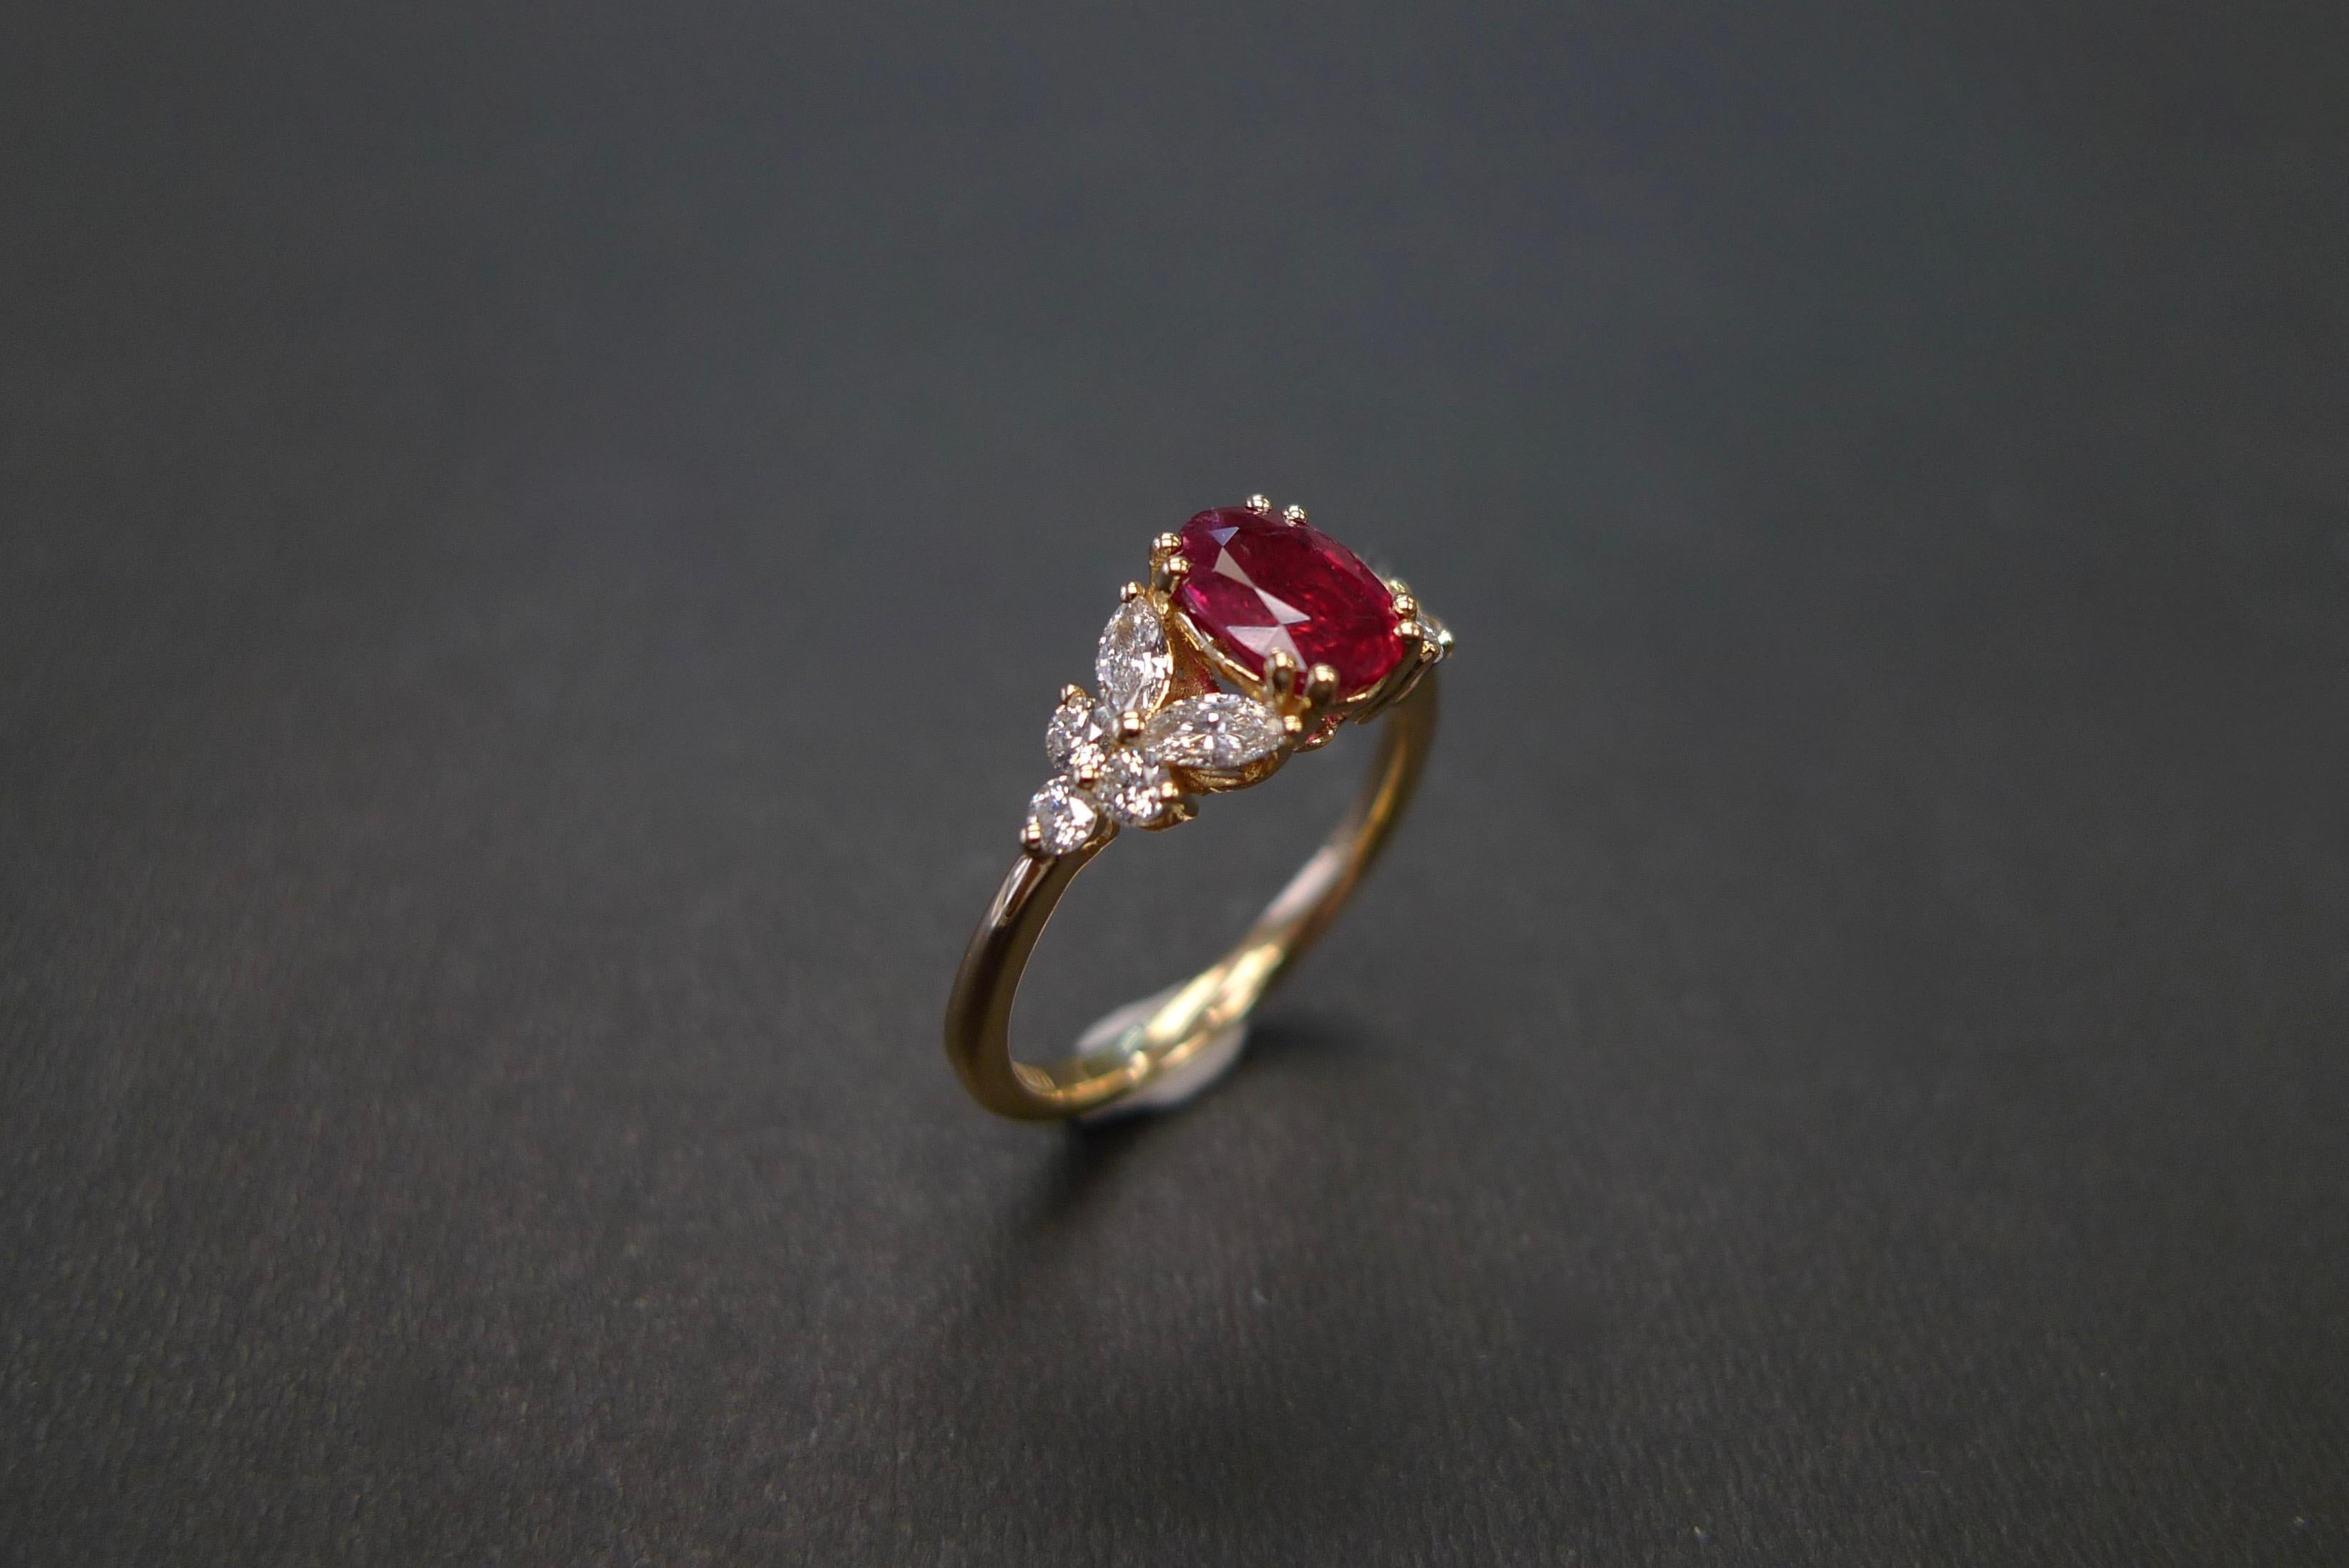 For Sale:  Natural Genuine Ruby and Marquise Diamonds Ring Made in 14k Yellow Gold  5